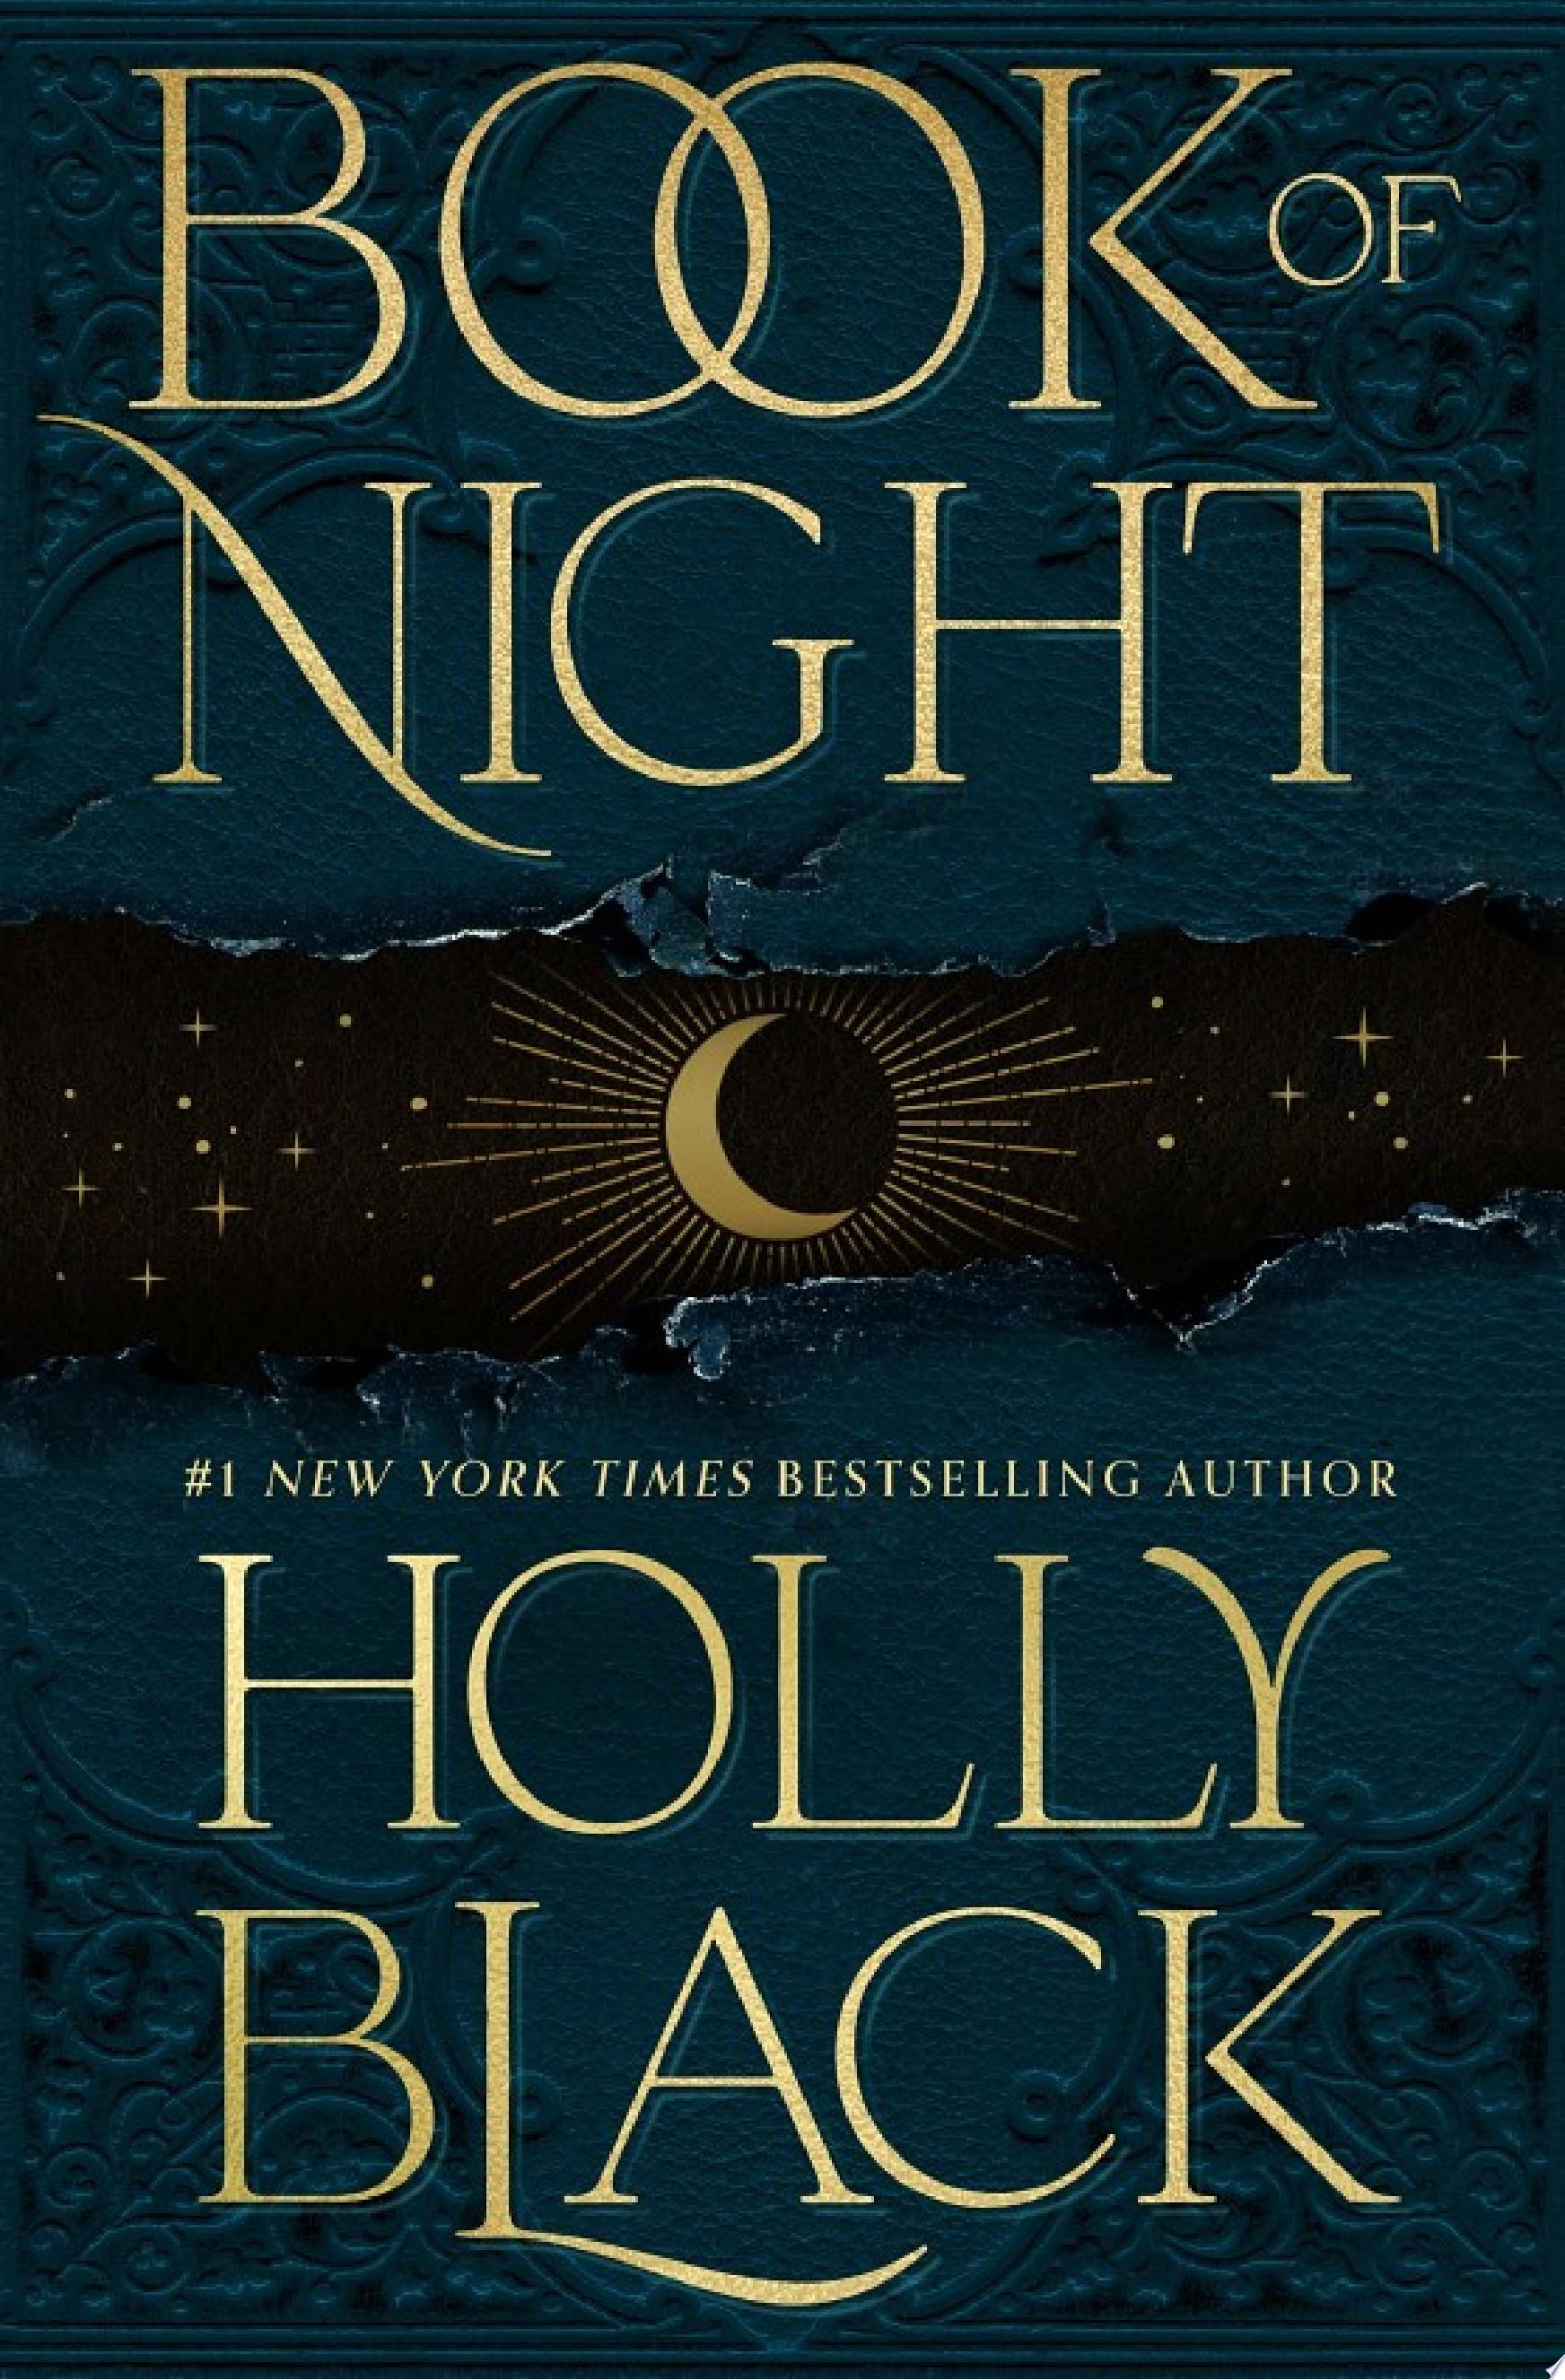 Image for "Book of Night"